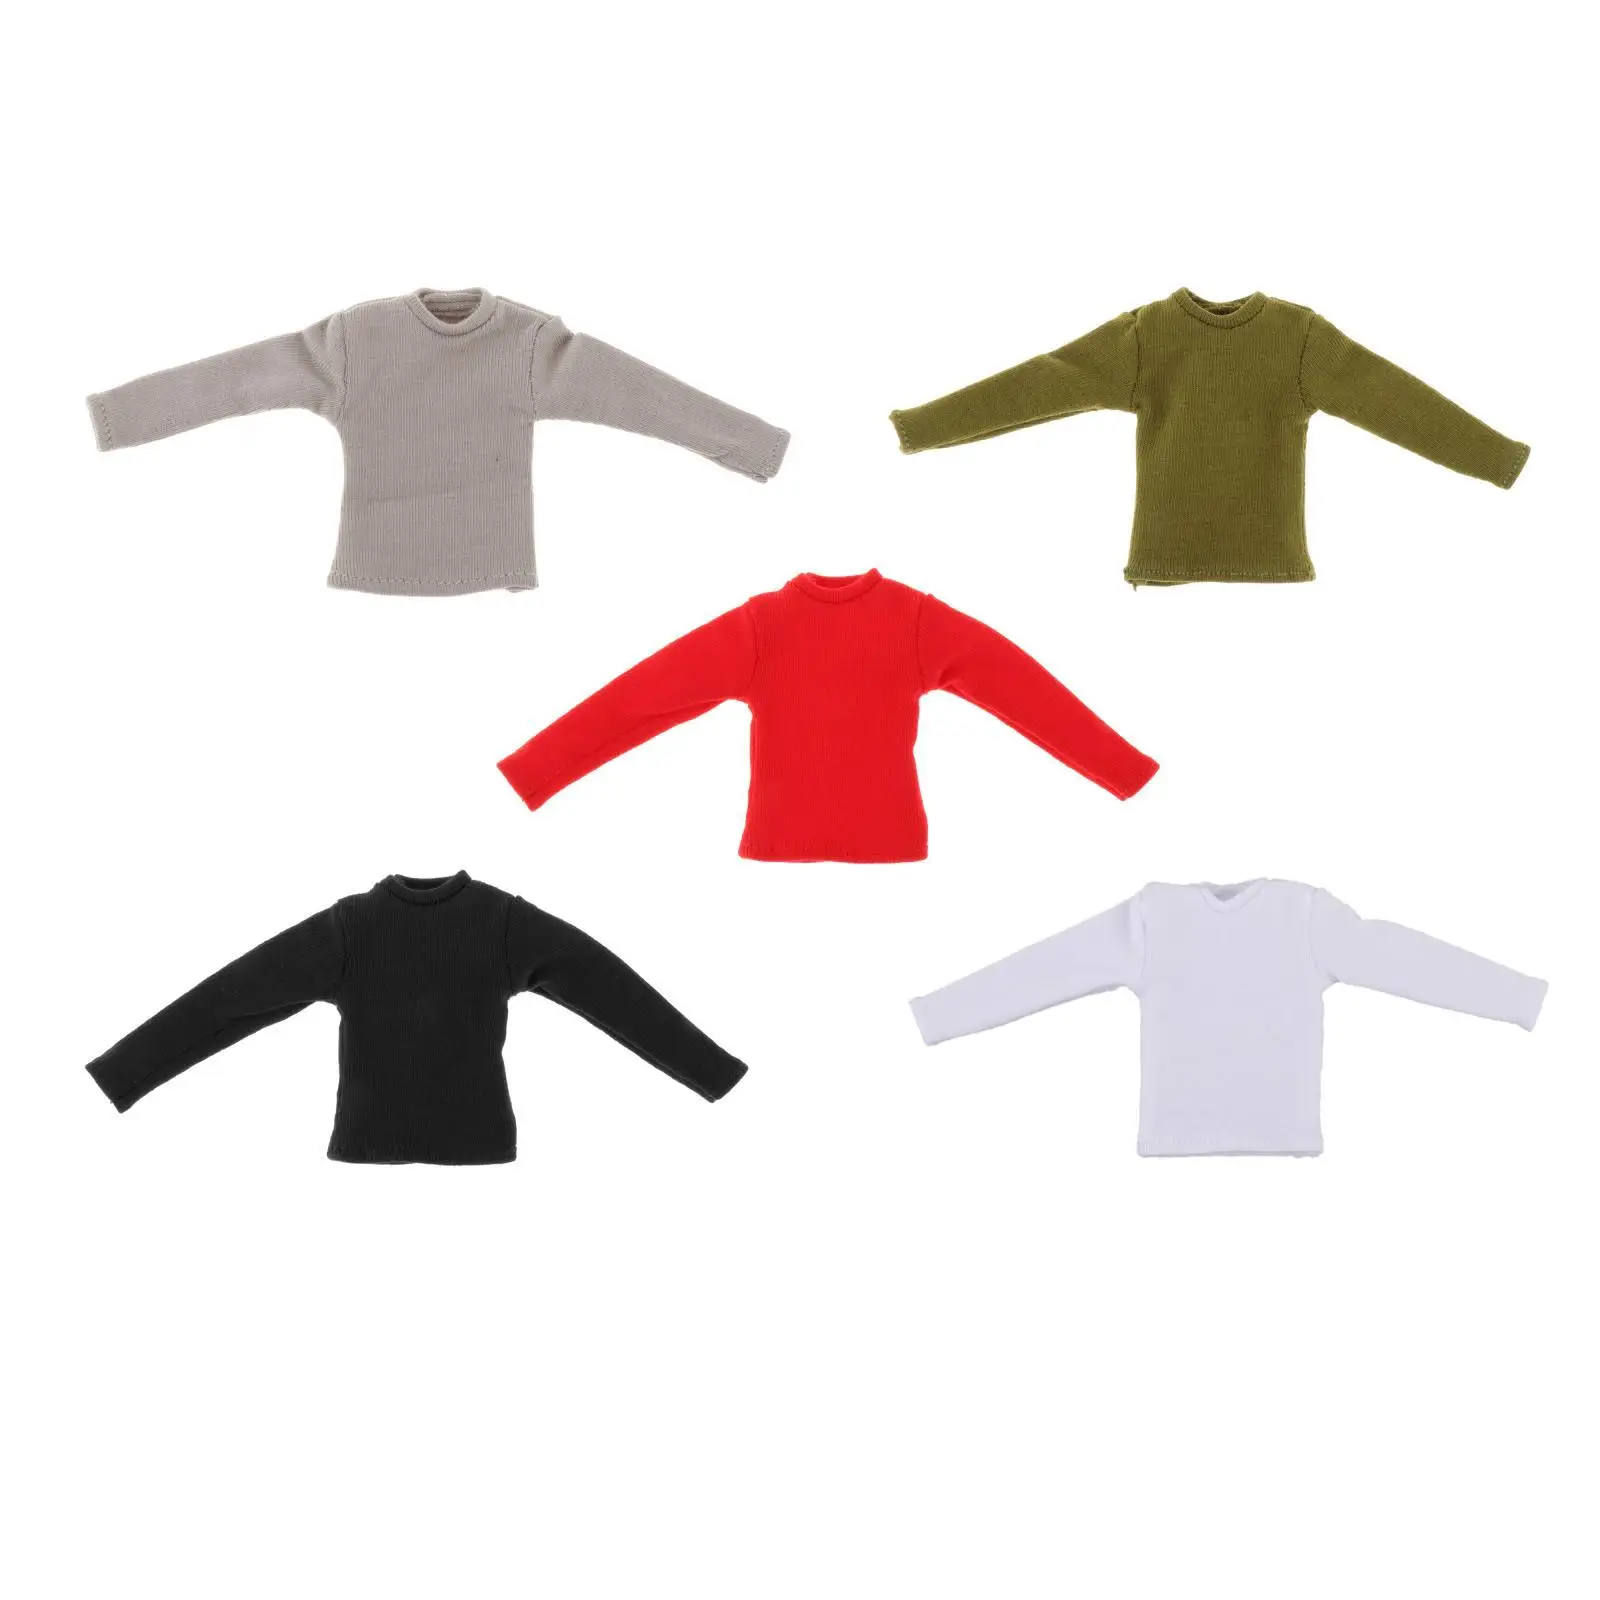 1/12 Scale Long Sleeve T Shirt Clothing Miniature Handmade Doll Clothes for 6in Dress up Doll Model Figures Body Accs